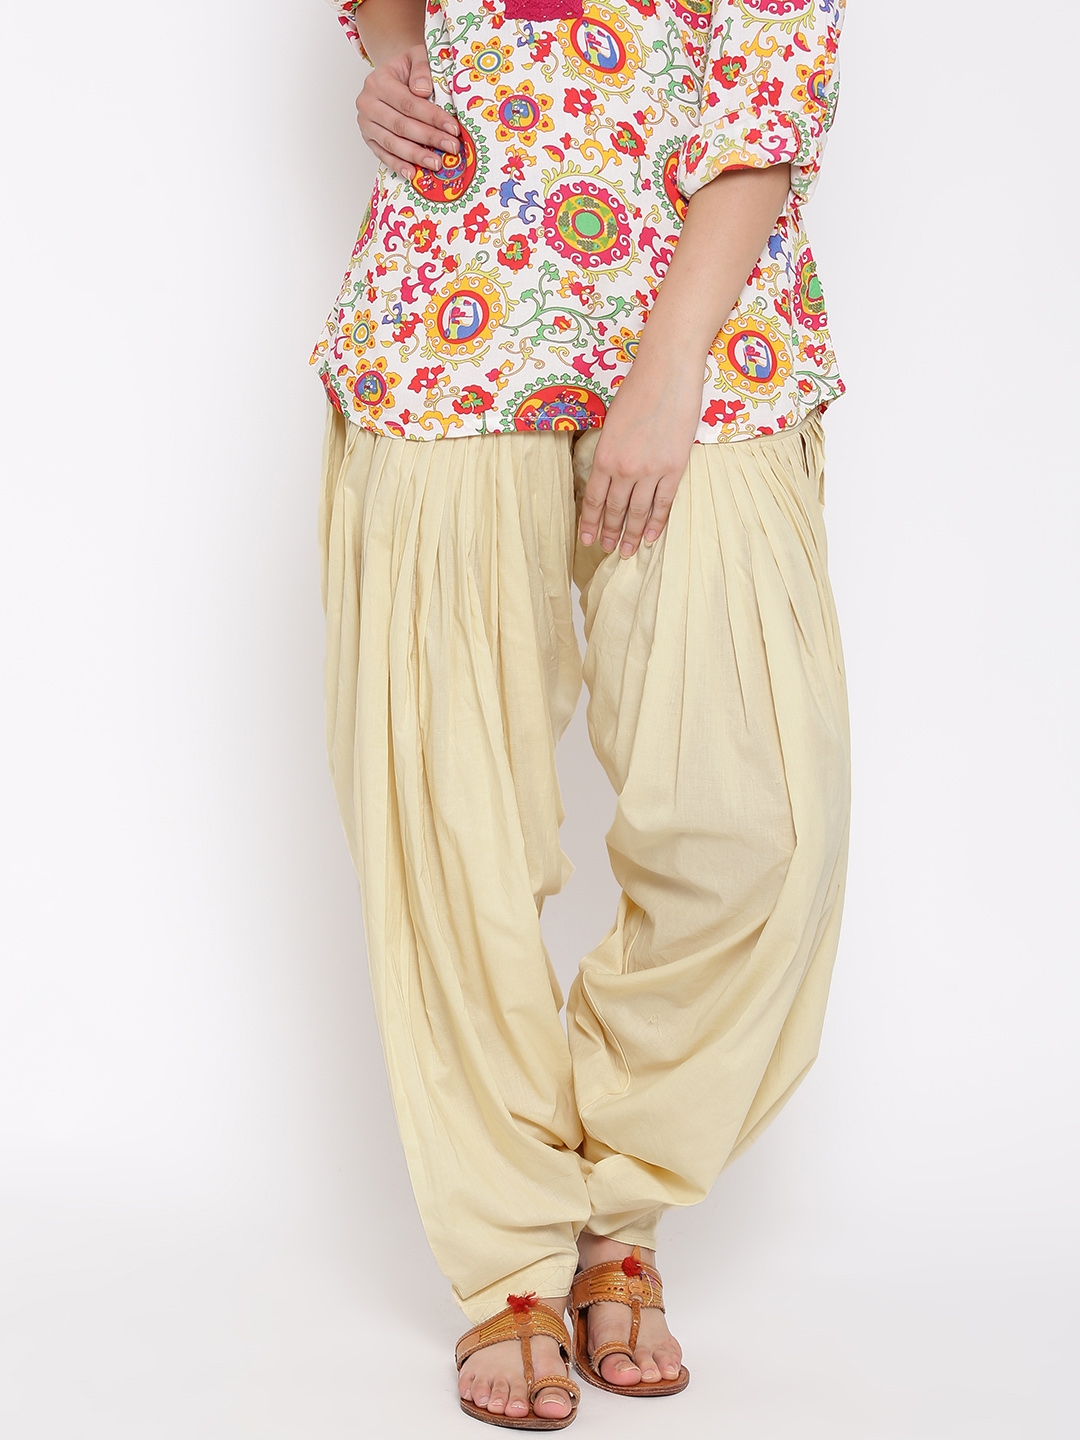 DSOFT  Patiala pants with Shirt collar tops By students  Facebook